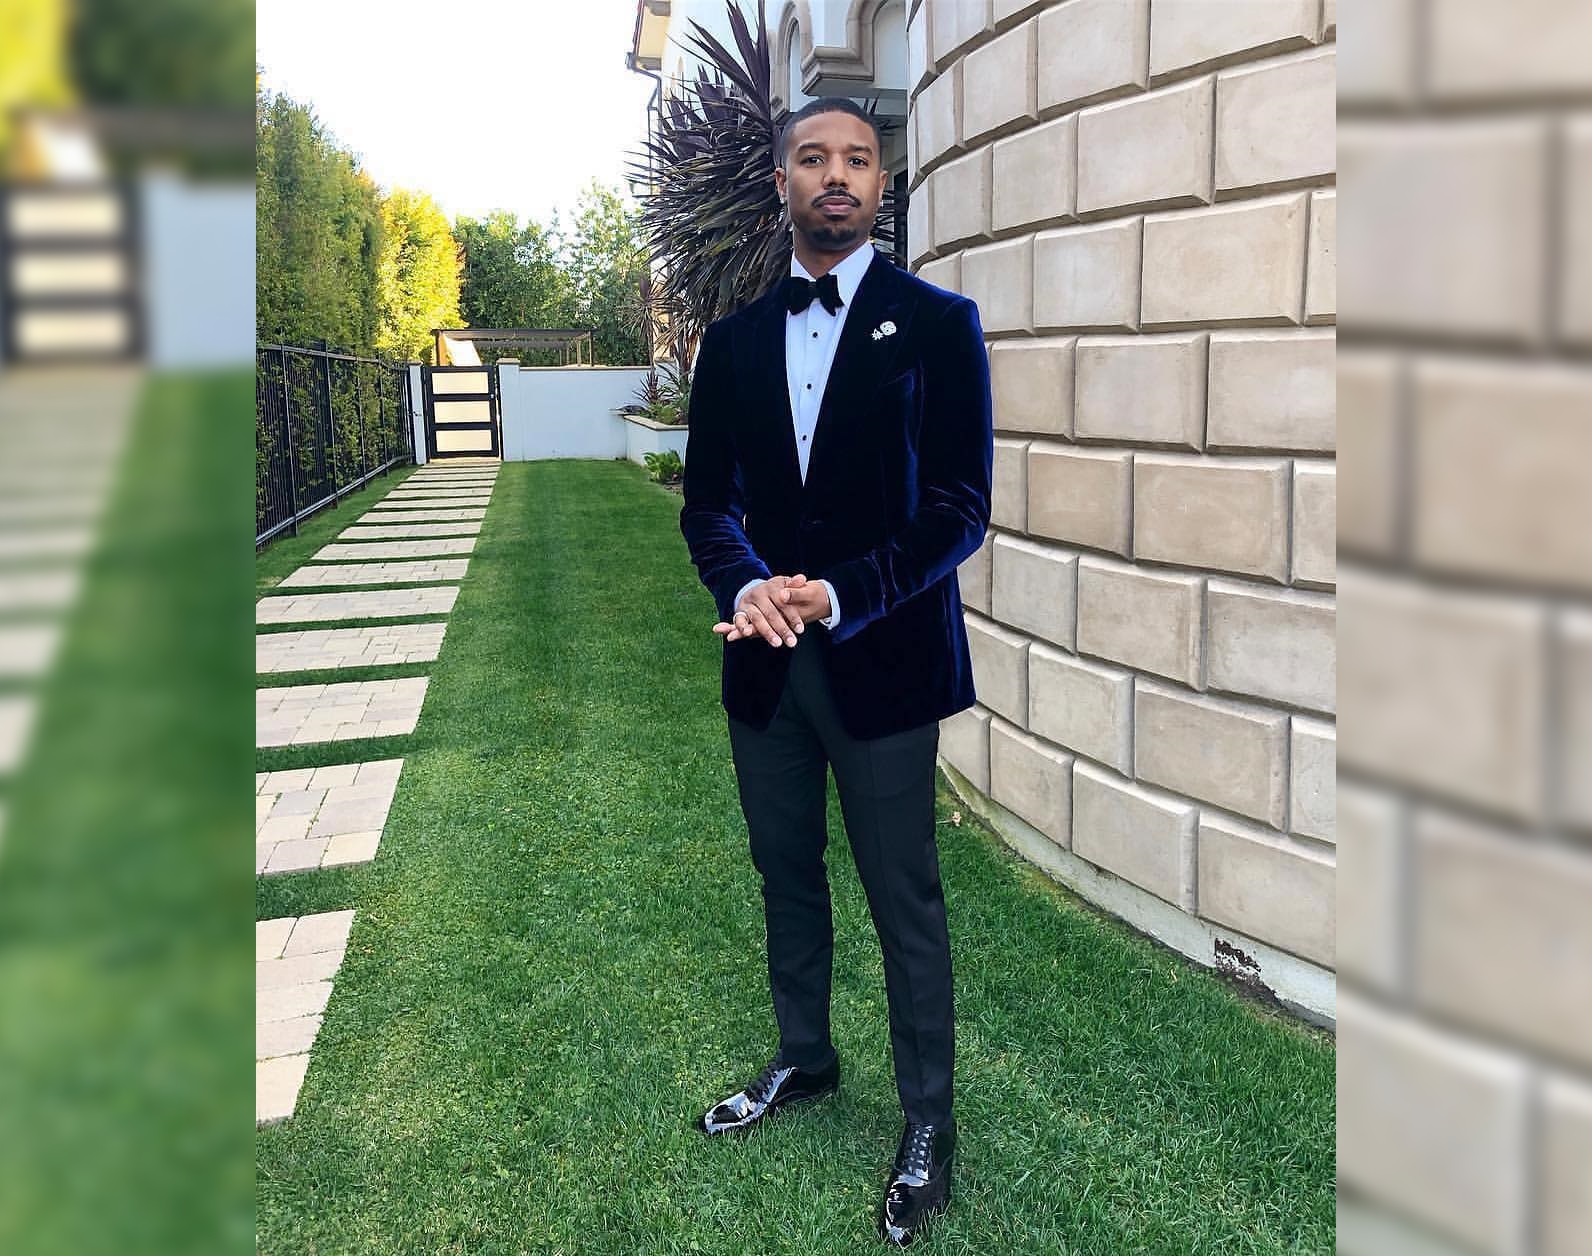 SPOTTED: Michael B. Jordan in Tom Ford Suit and Piaget Watch